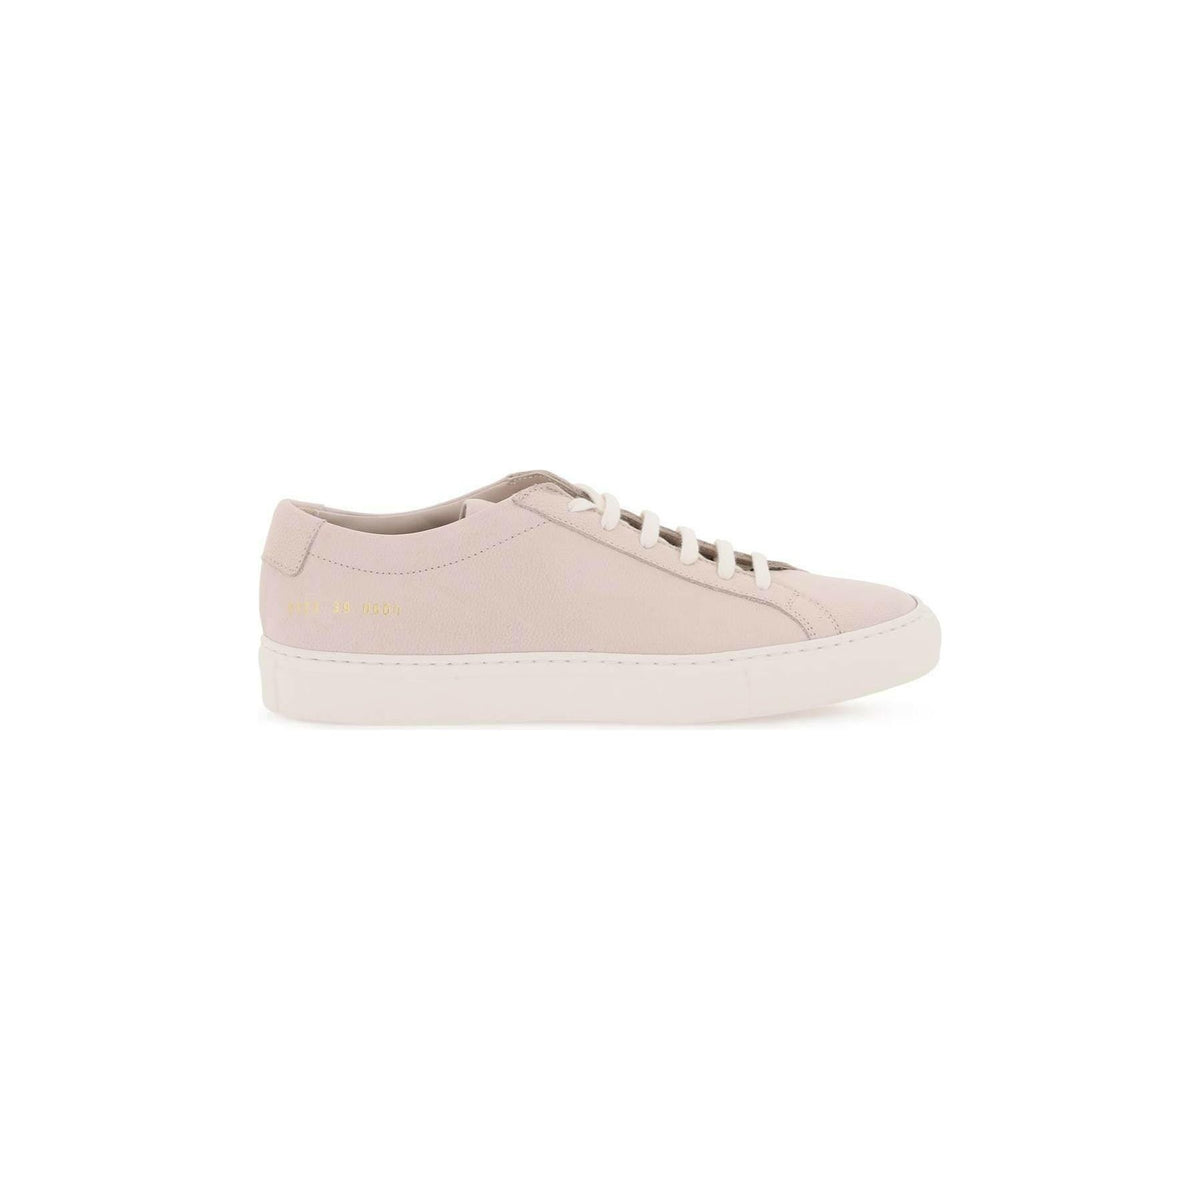 Nude Original Achilles Low-Top Leather Sneakers COMMON PROJECTS JOHN JULIA.